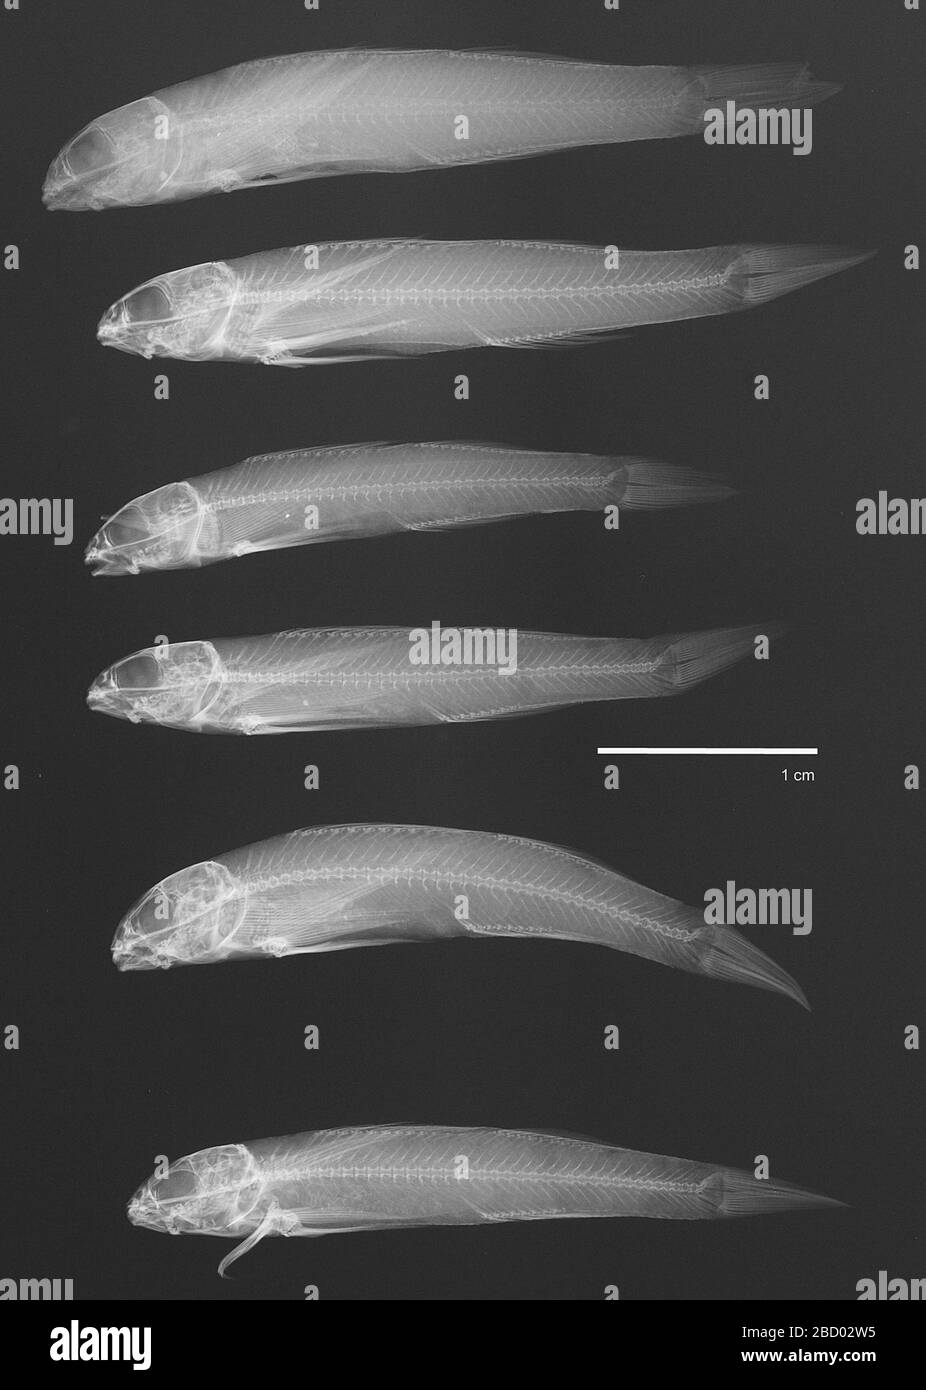 Etheostoma rupestre Gilbert Swain. Out of 36695 lectotype designation by c. tsai in collette, b. b. and l. w. knapp, 1966. catalog of type specimens of the darters (pisces, percidae, etheostomatini). proceedings s of the united states national museum, vol. 119, no. 3550, p. 38.11 May 201817 Etheostoma rupestre Gilbert Swain Stock Photo